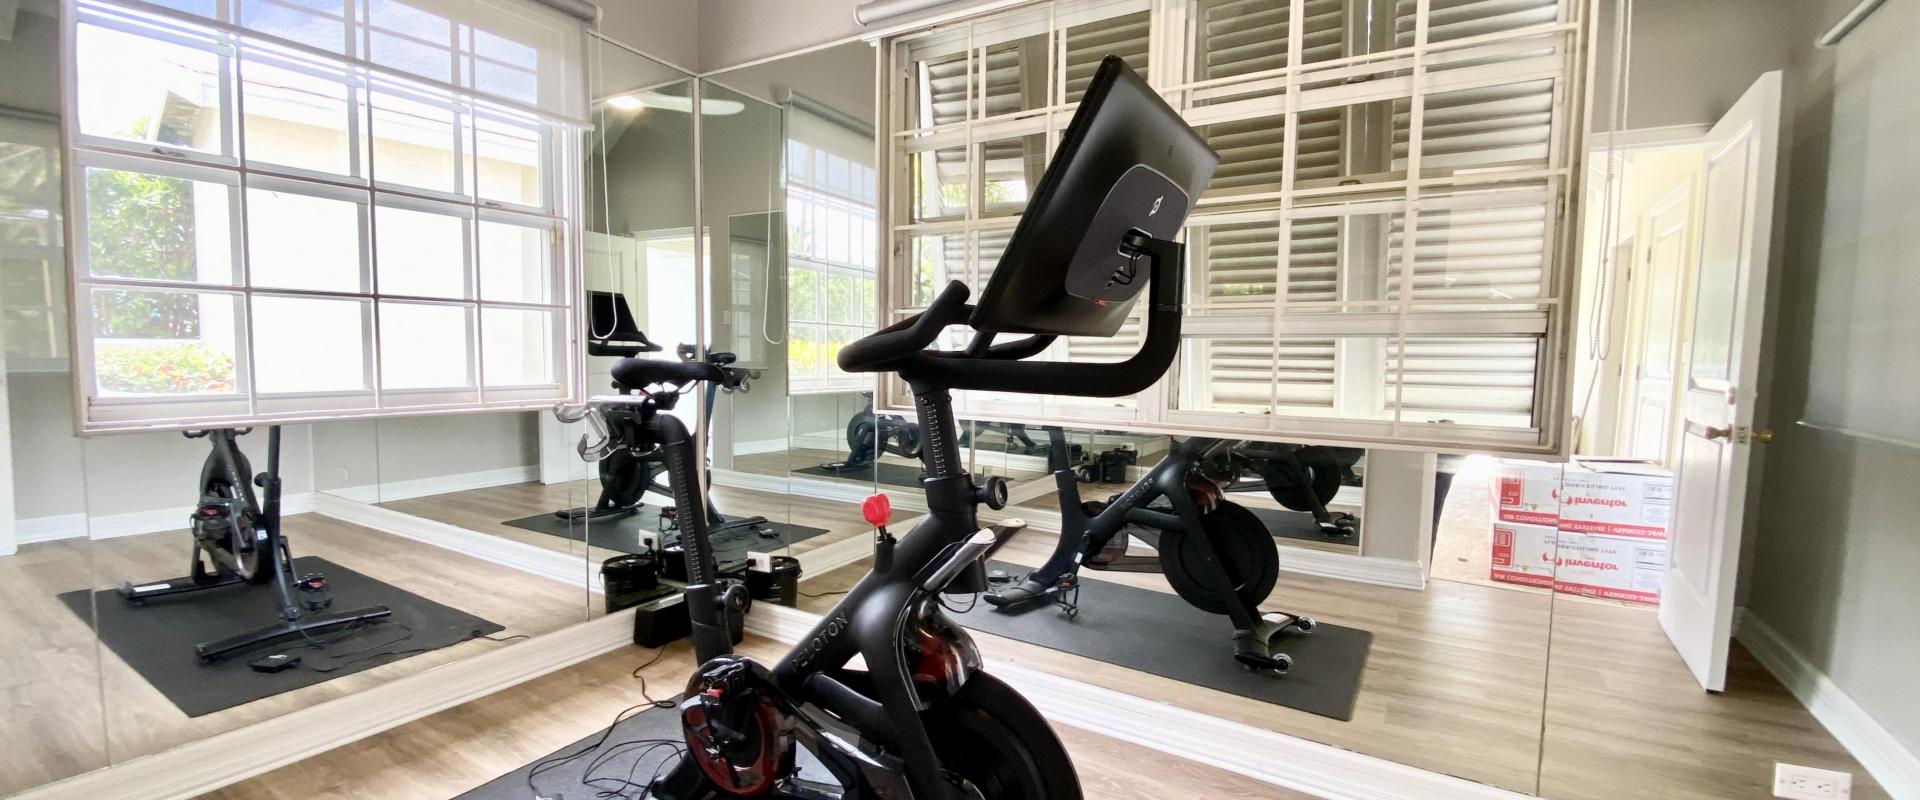 Fosters House Holiday Rental In Barbados Gym with Peloton Bike